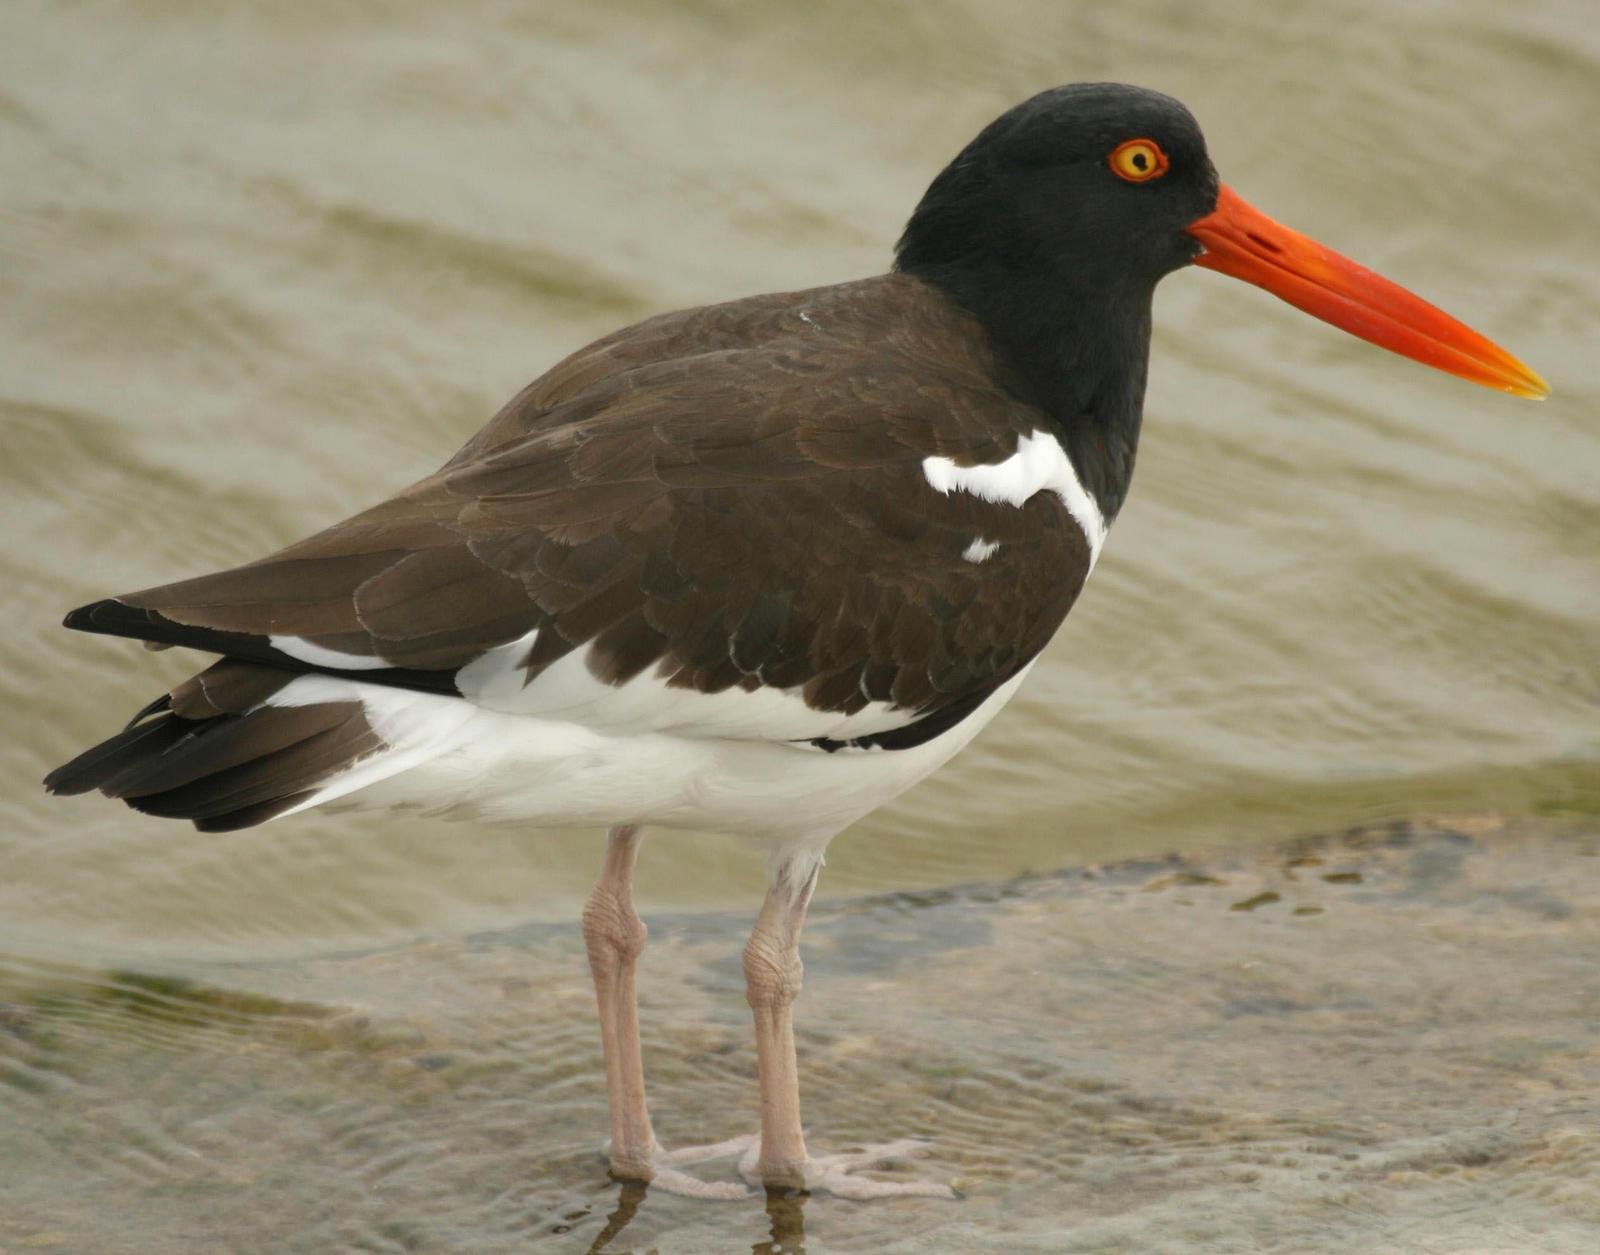 American Oystercatcher Photo by Ric Hoover